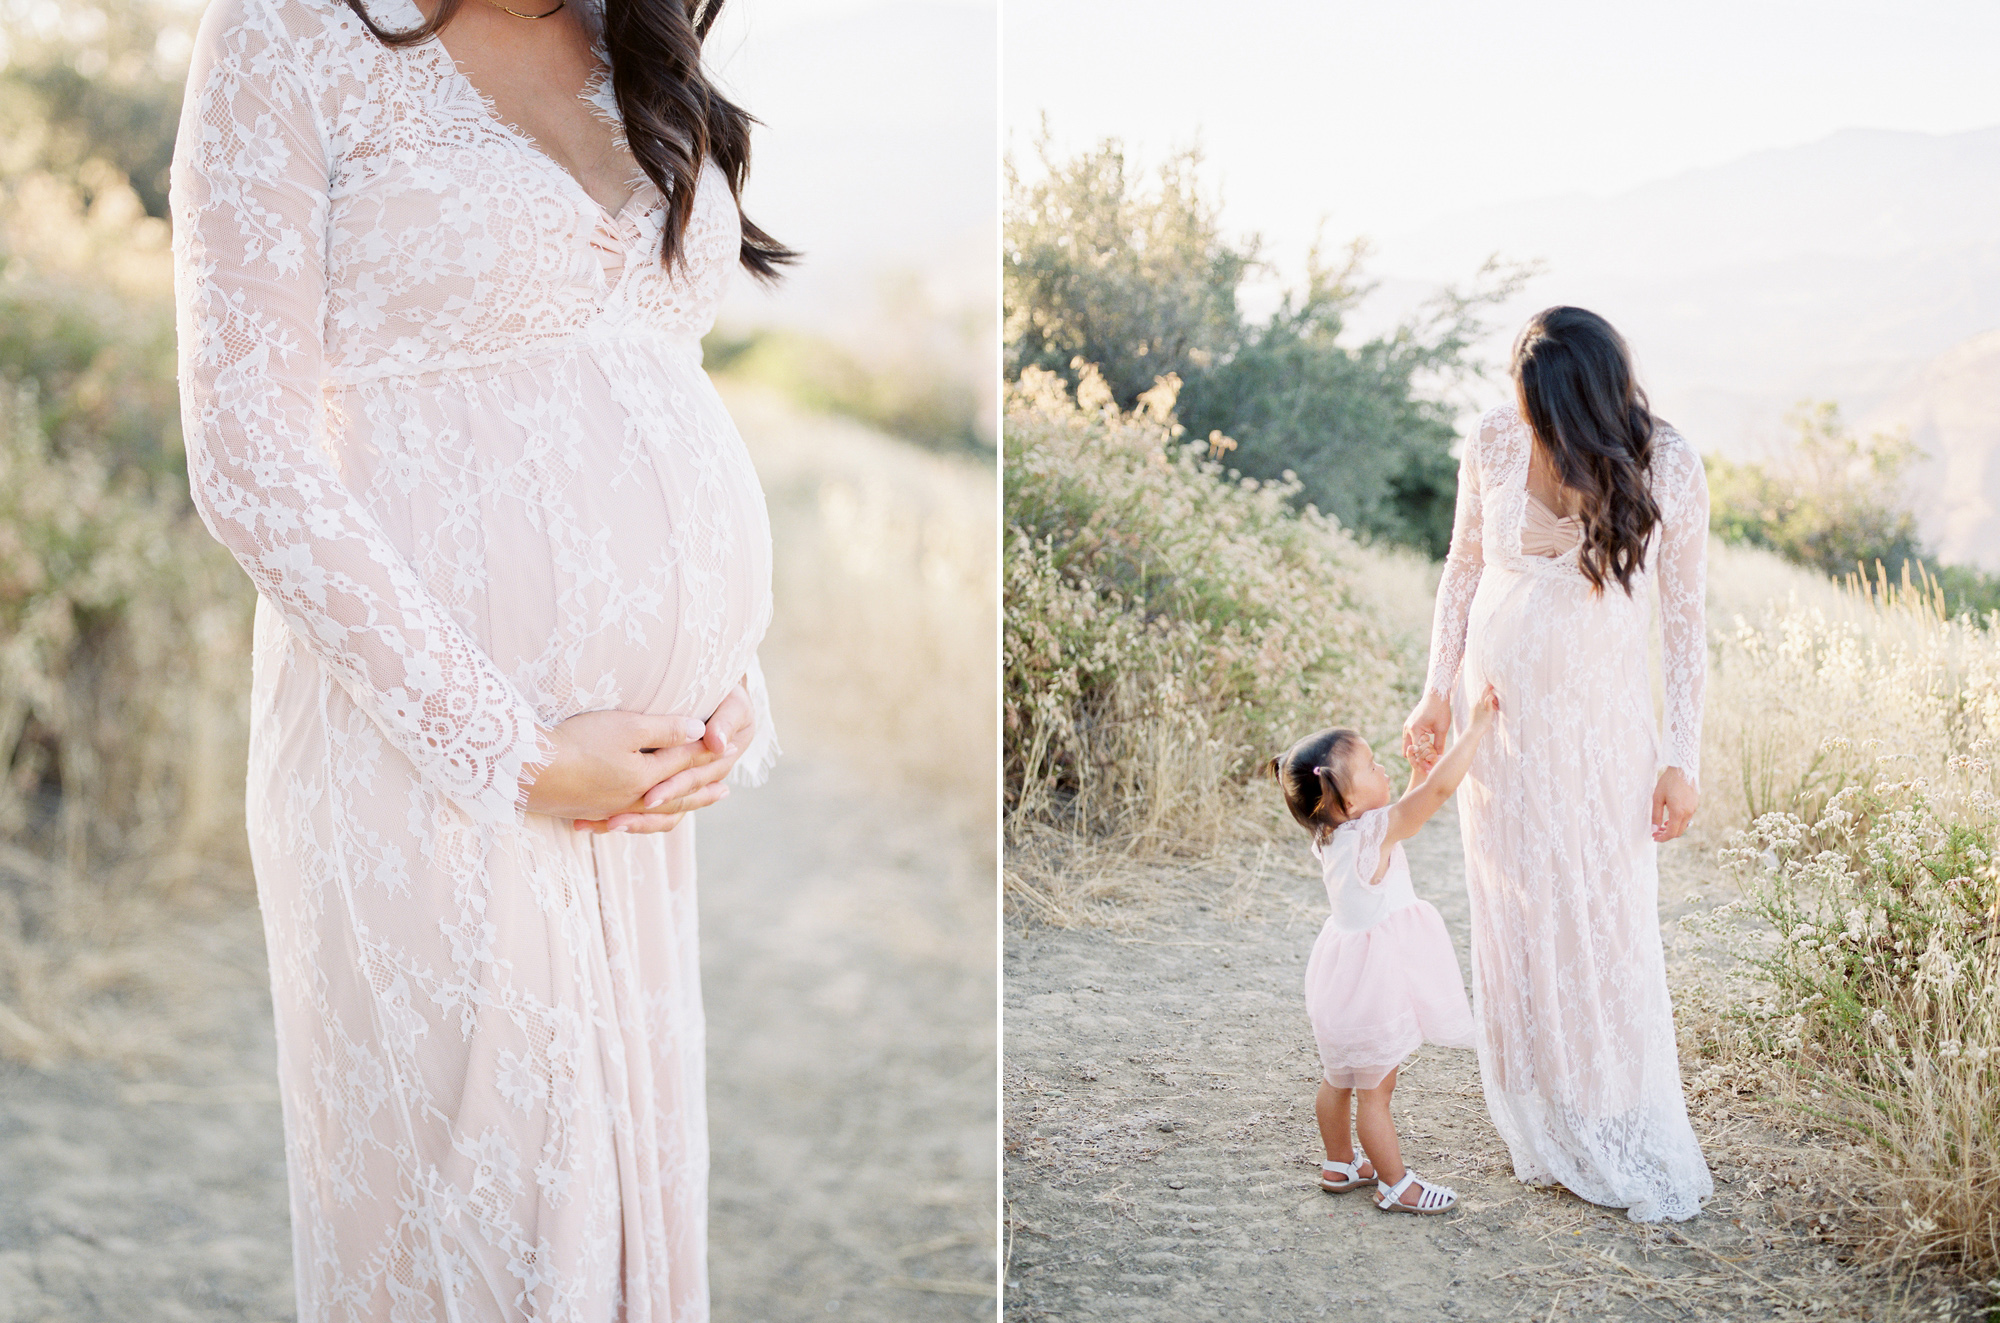 Maternity photography in Dallas by DFW film photographer Tenth & Grace.